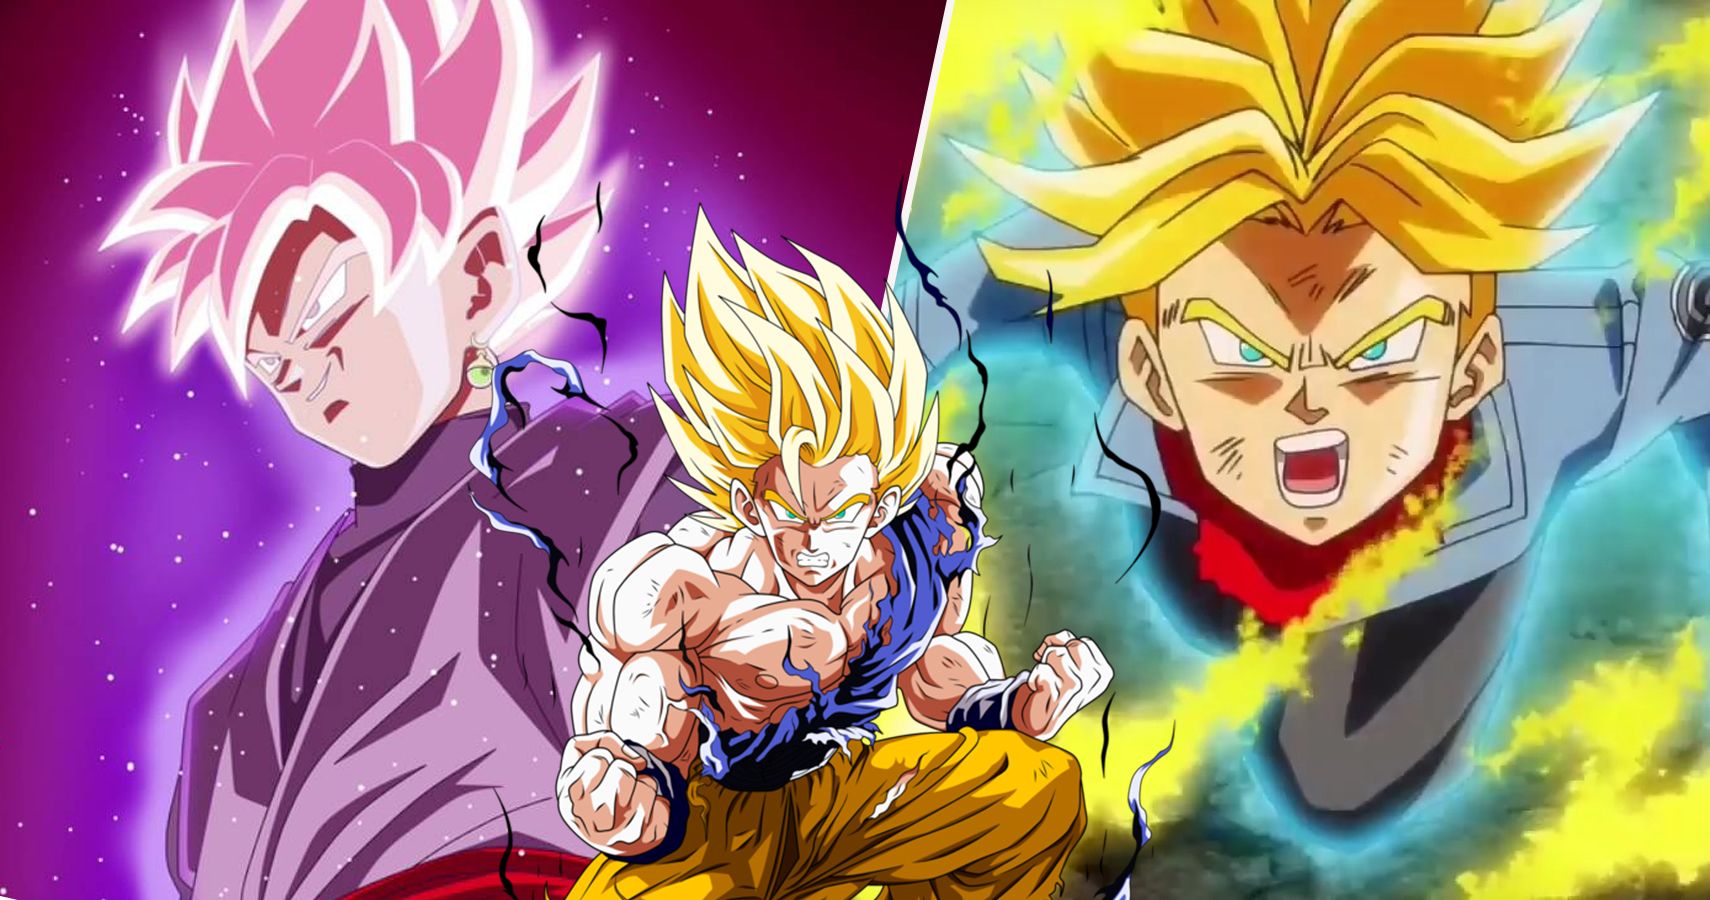 Final Form The 25 Strongest Dragon Ball Transformations Of All Time Officially Ranked - roblox dragon ball z final stand frieza race